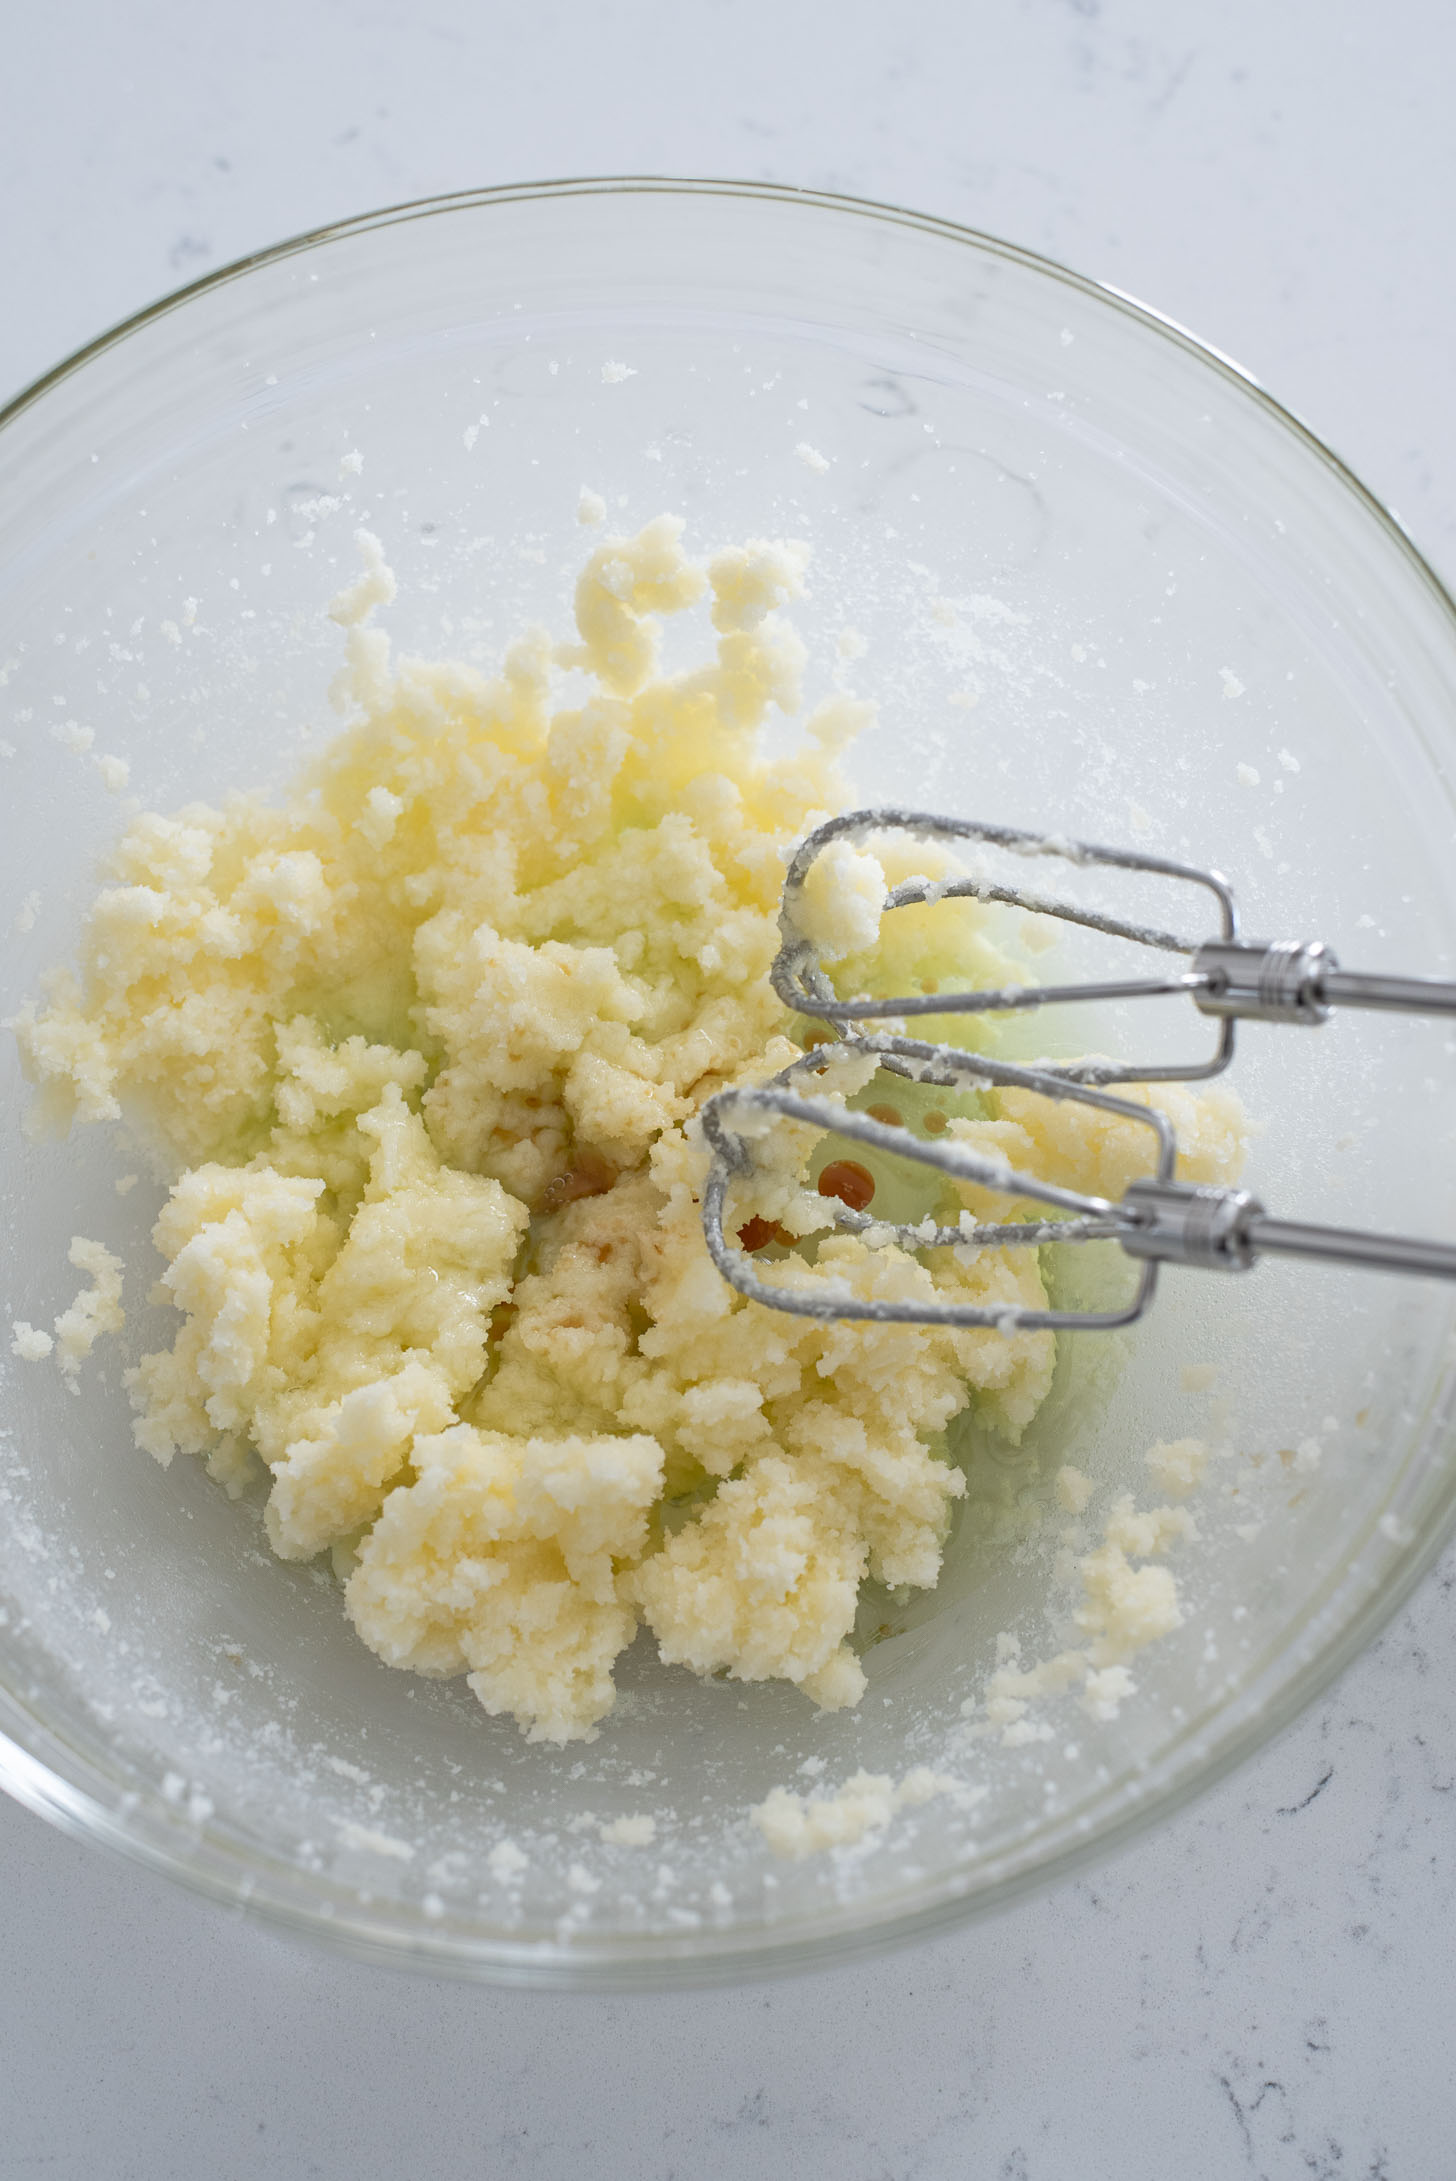 Butter and oil is mixed together in a bowl.